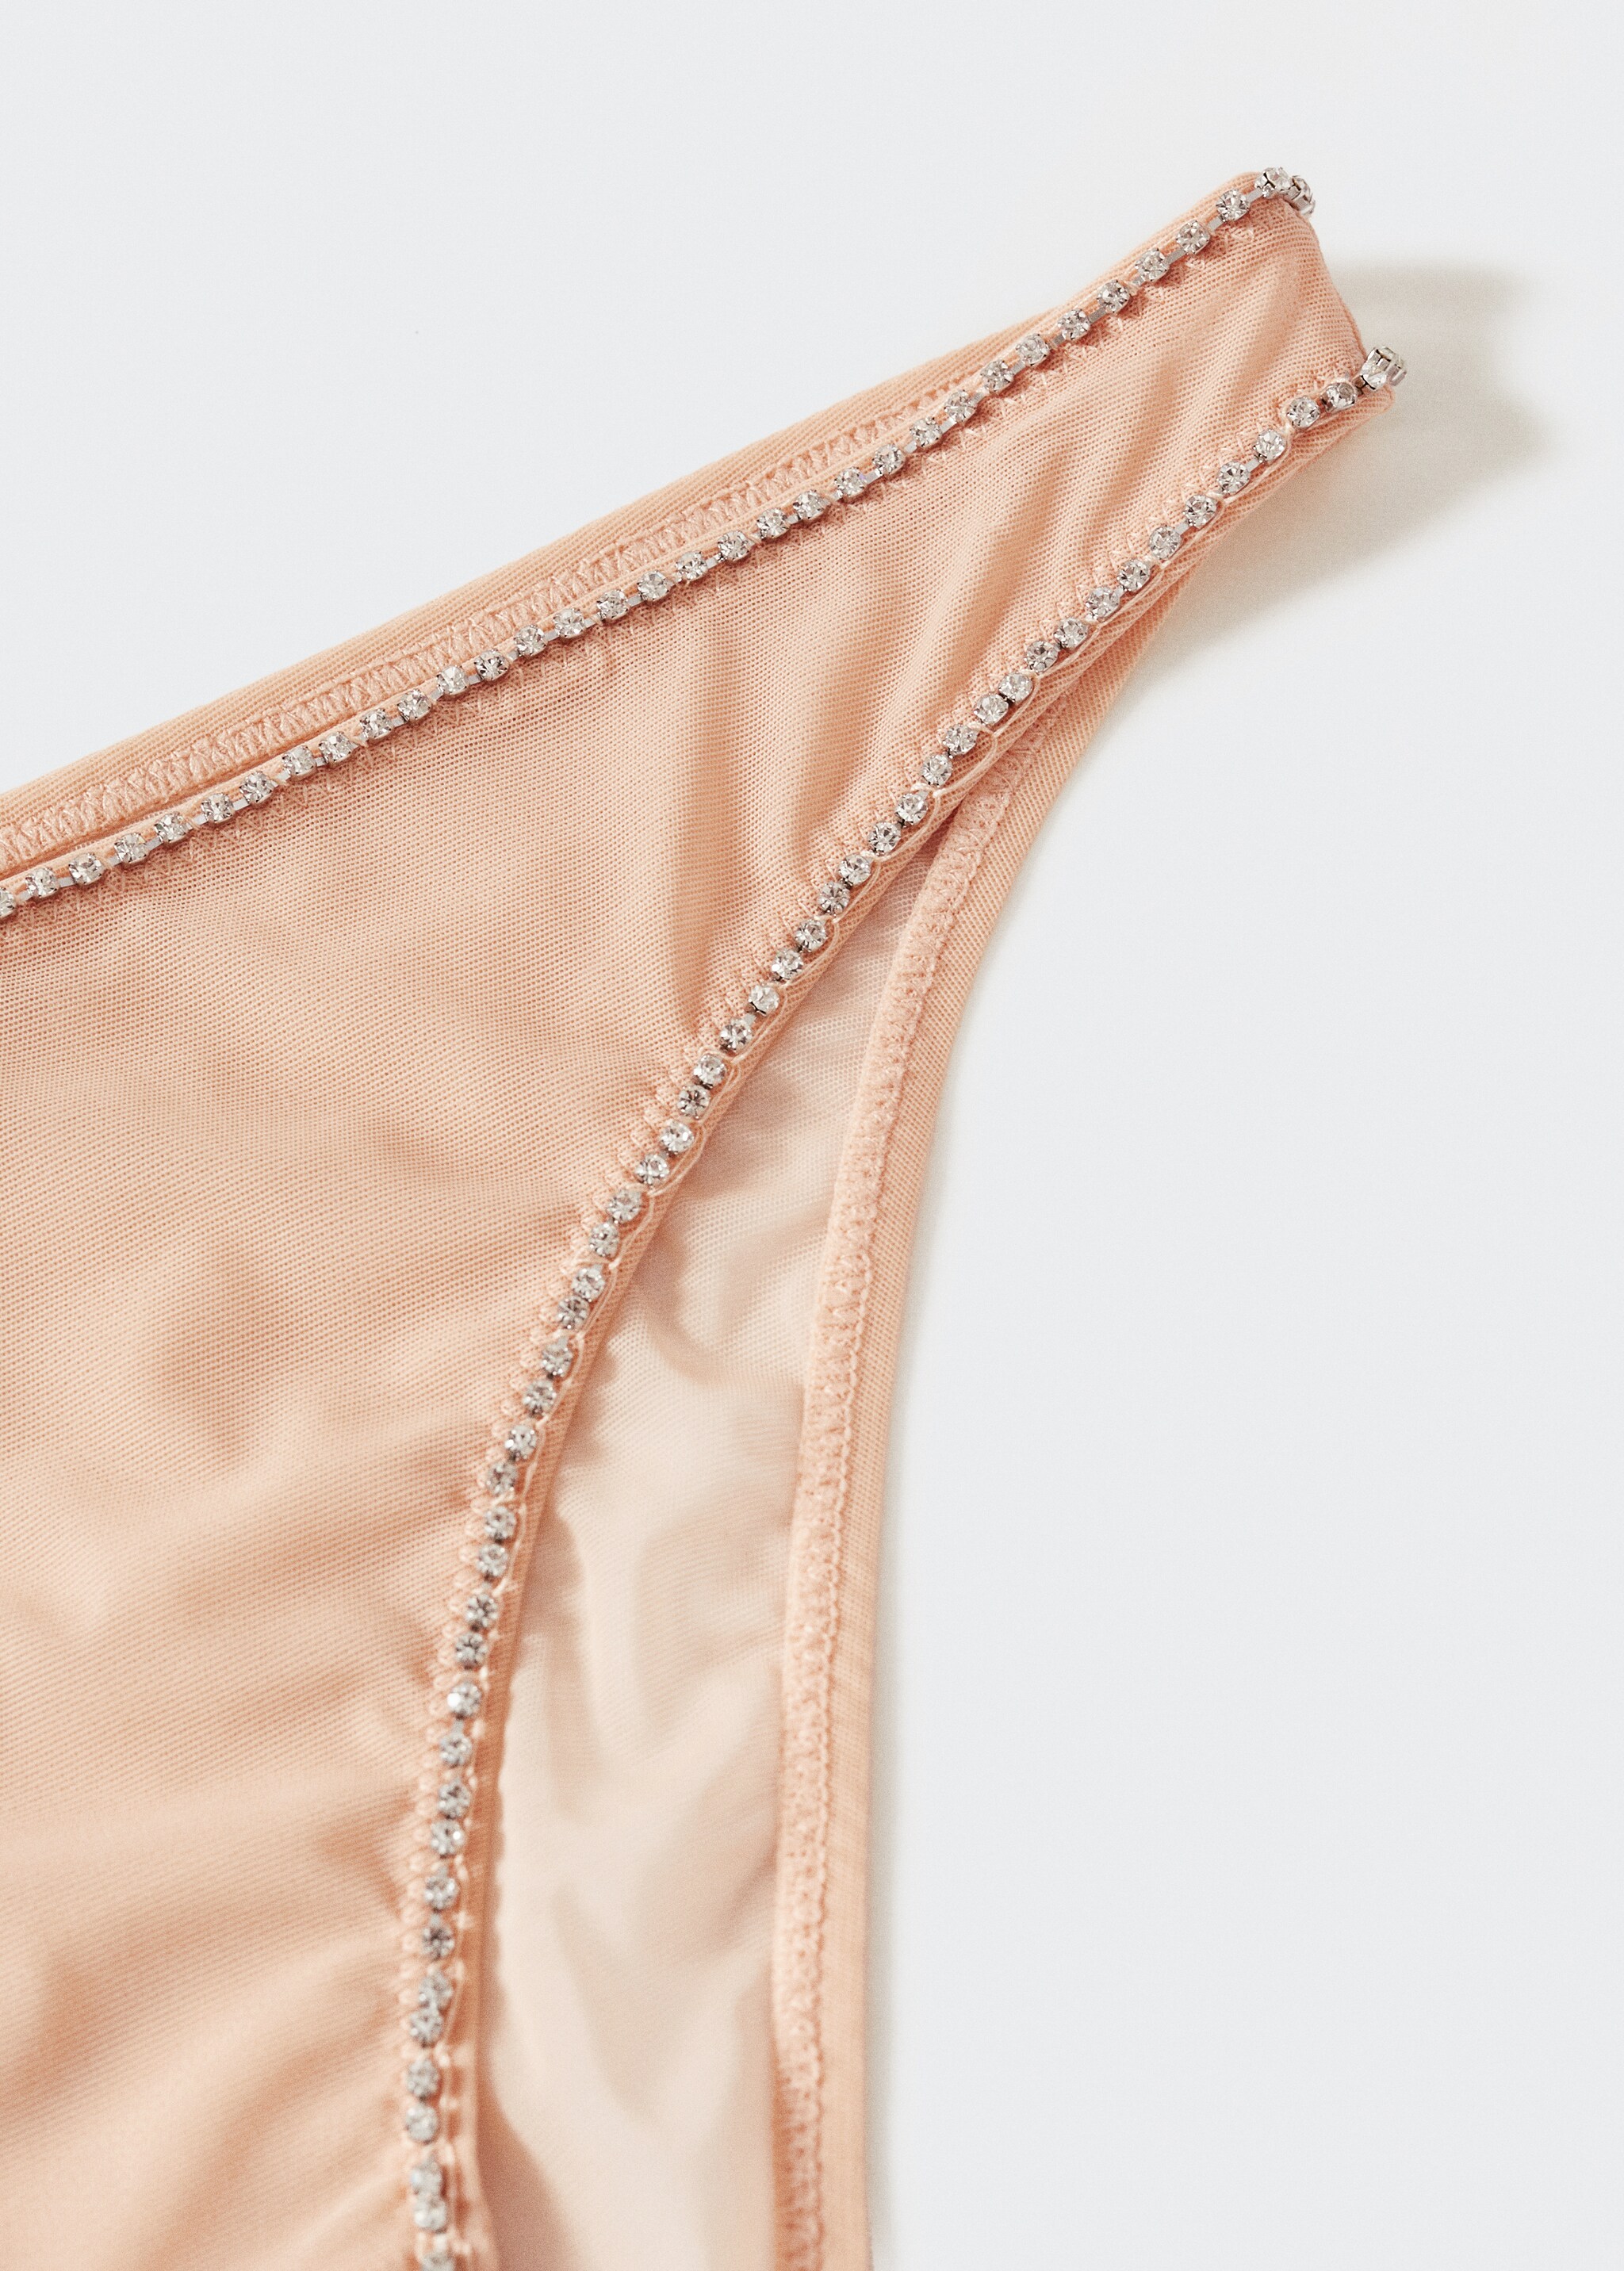 Shiny panties - Details of the article 8